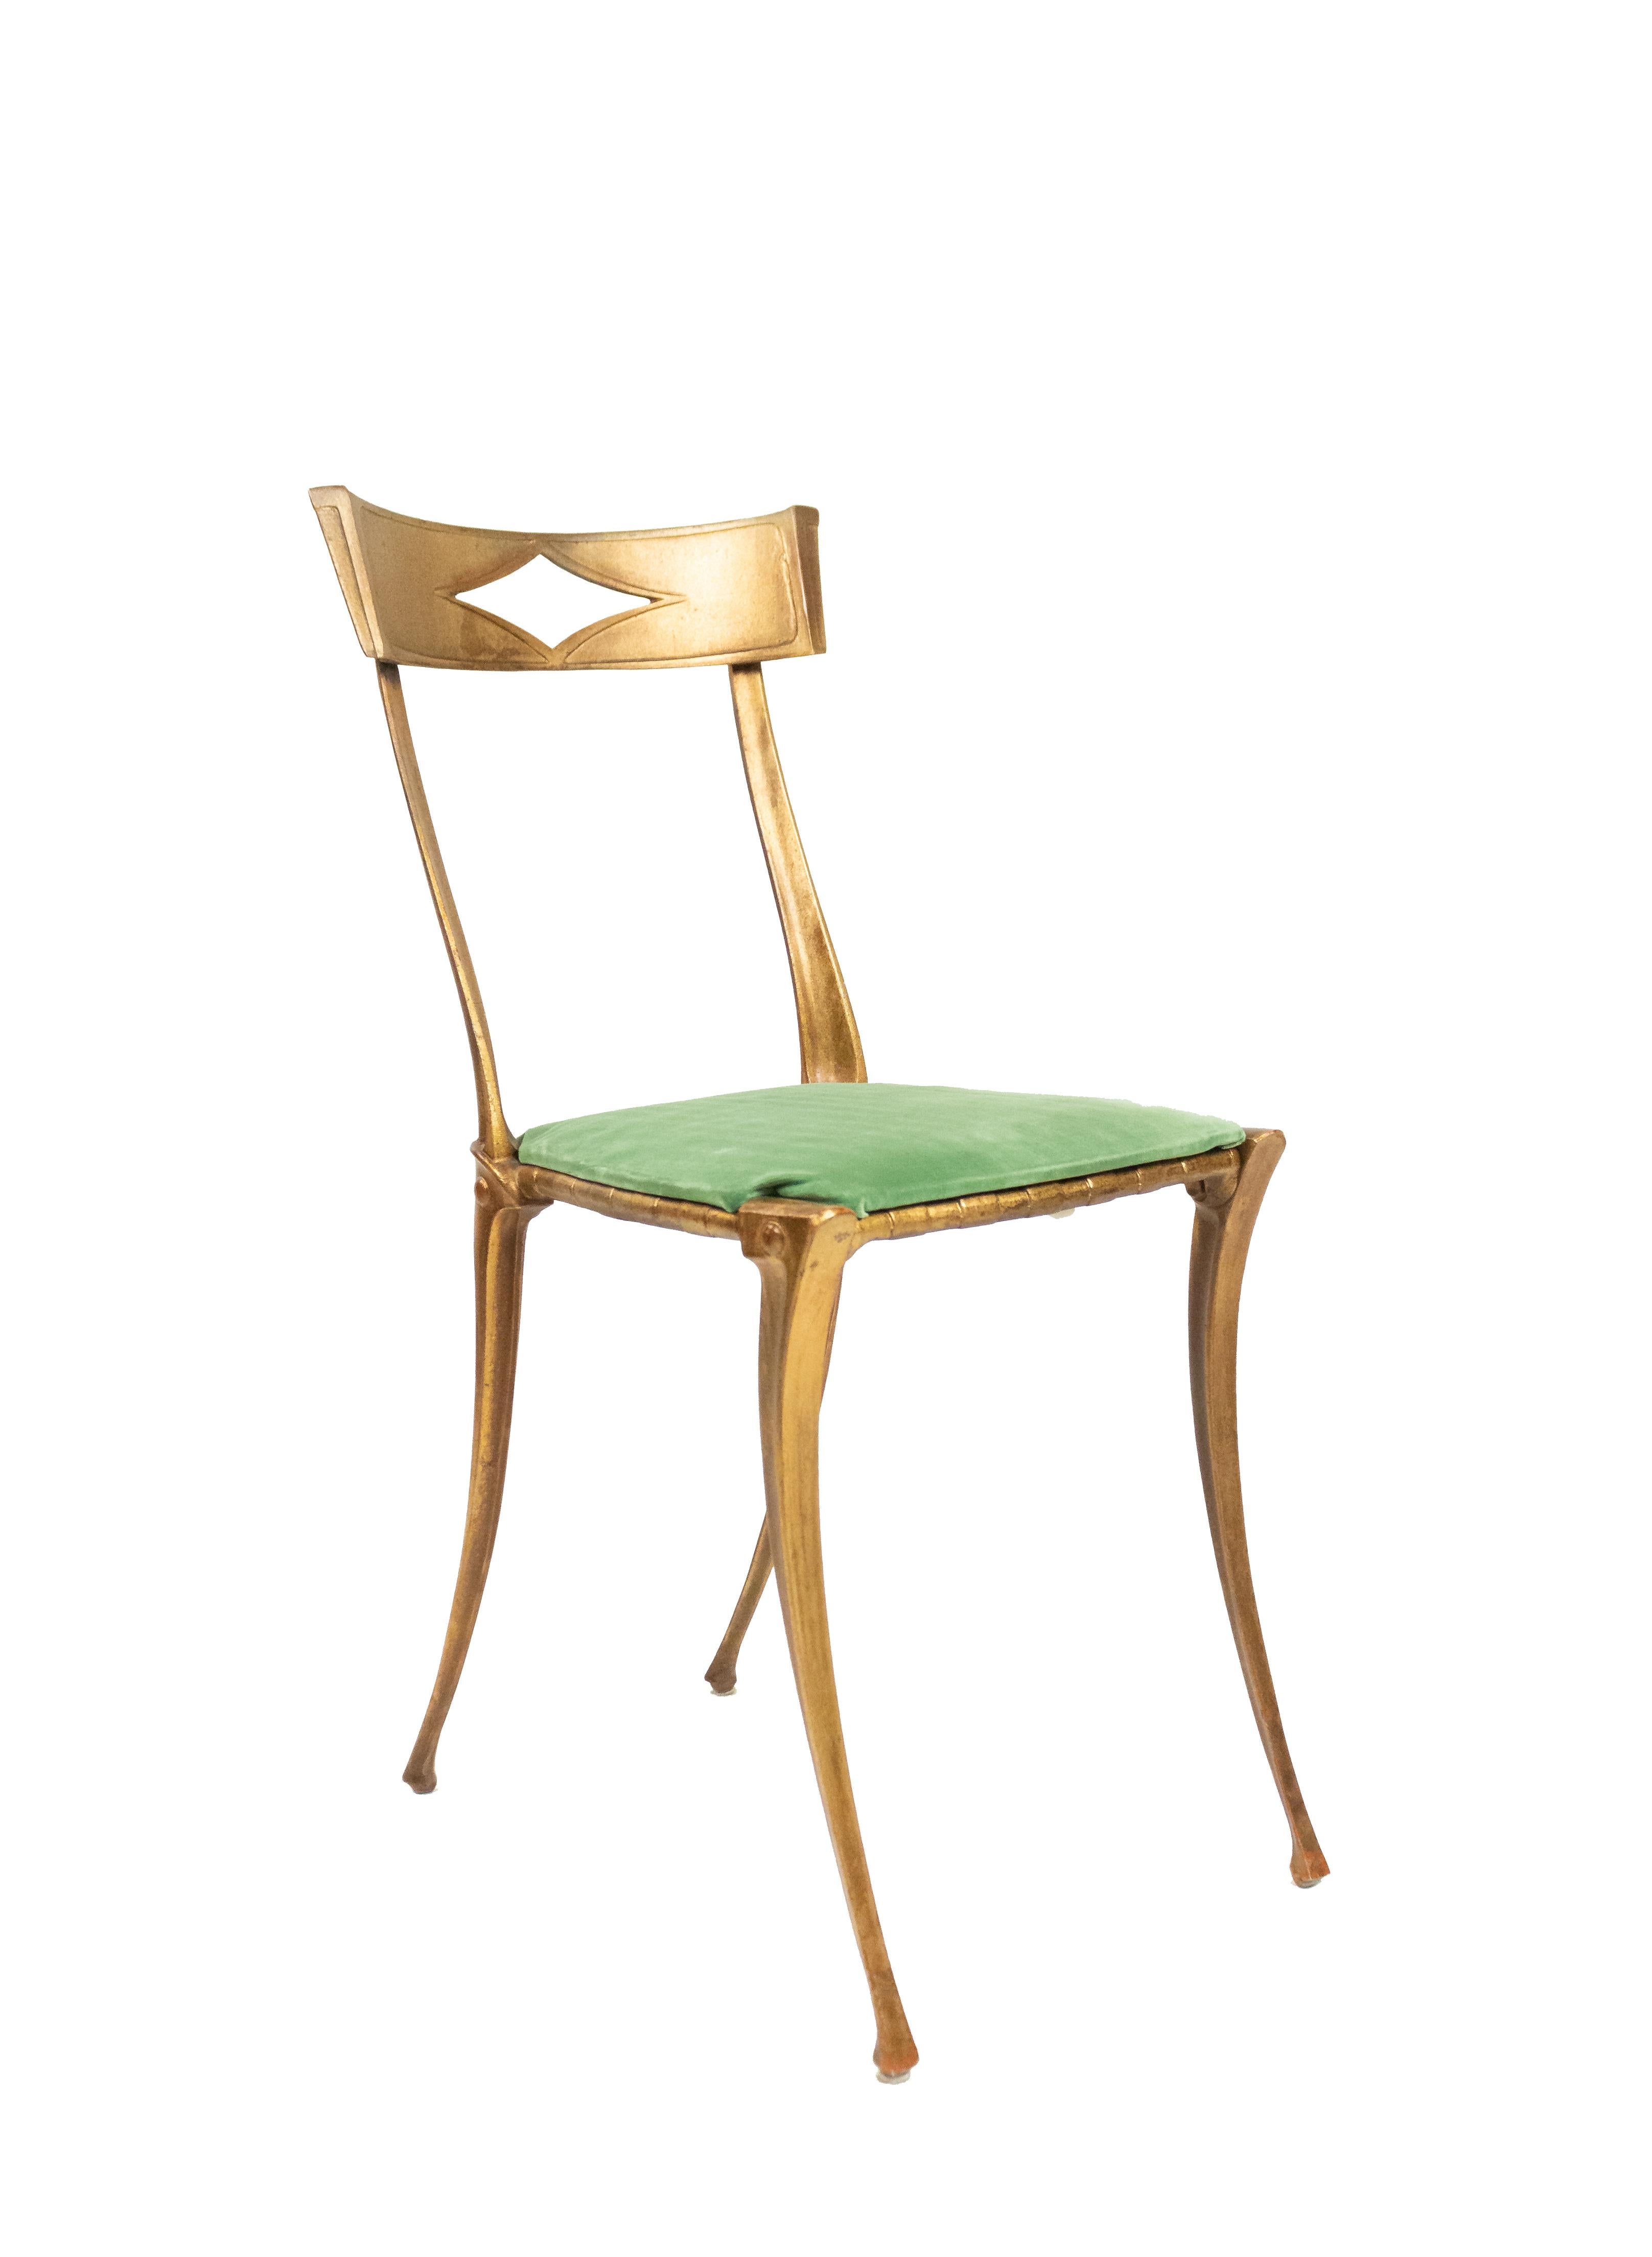 American Gilt Metal Side Chair with Green Velvet Upholstery For Sale